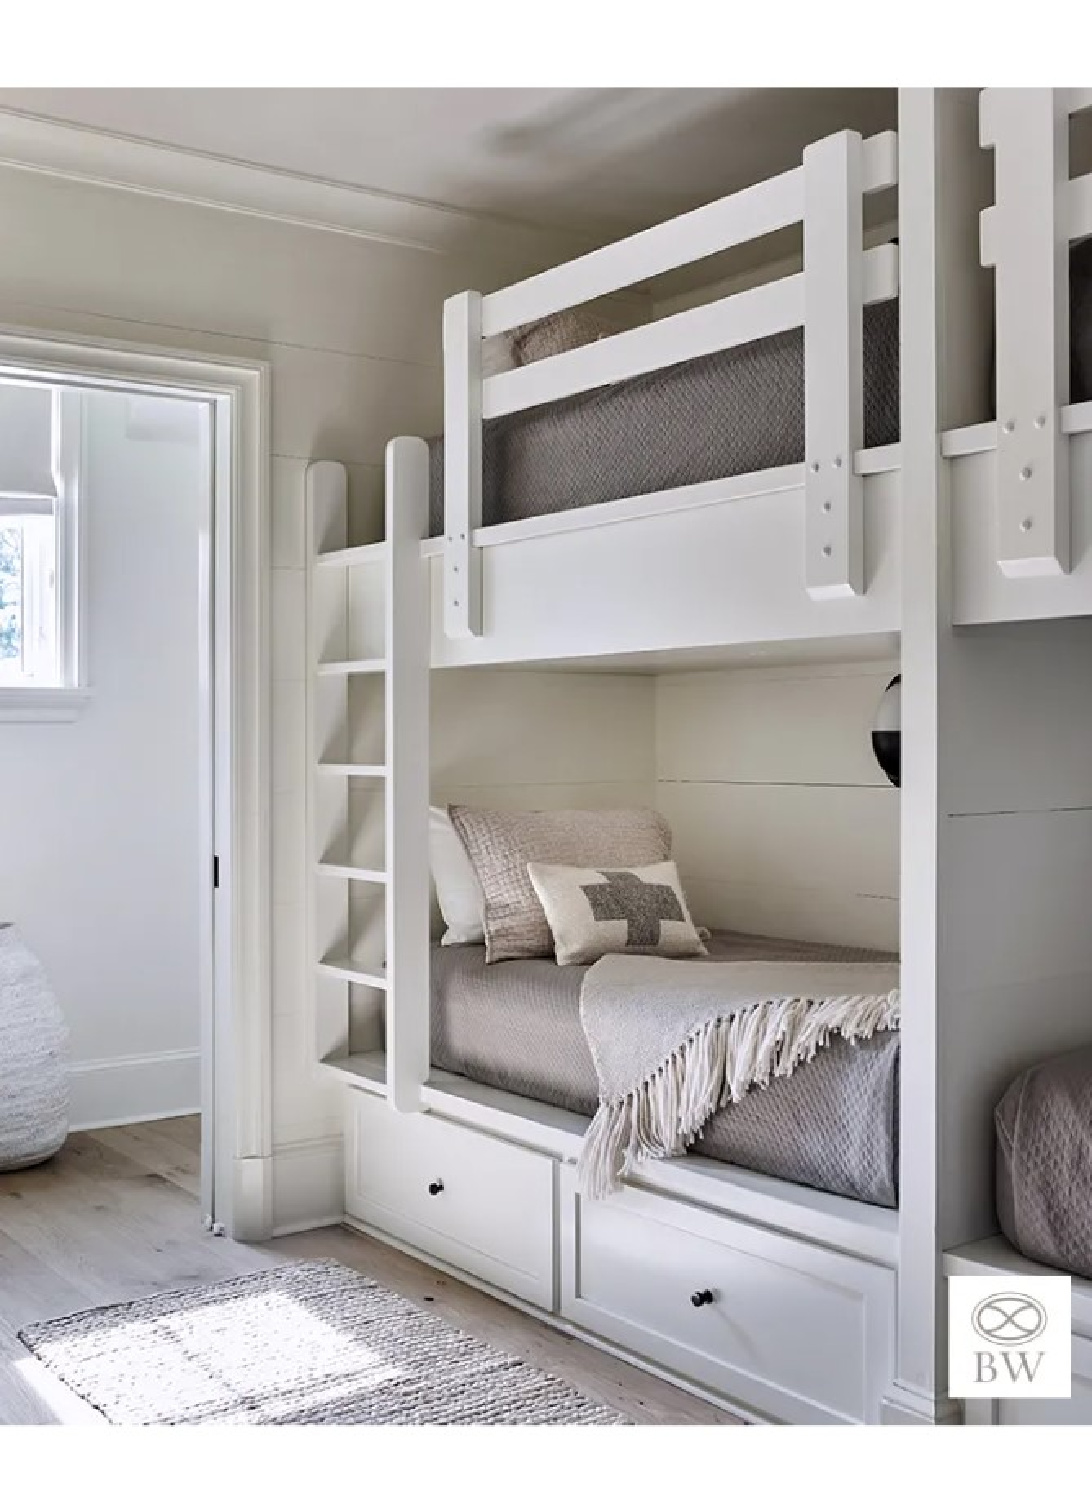 Beautiful built-in bunks design from Beth Webb's Sea Island project - photo by Emily Followill. #bethwebb #timelessinteriors